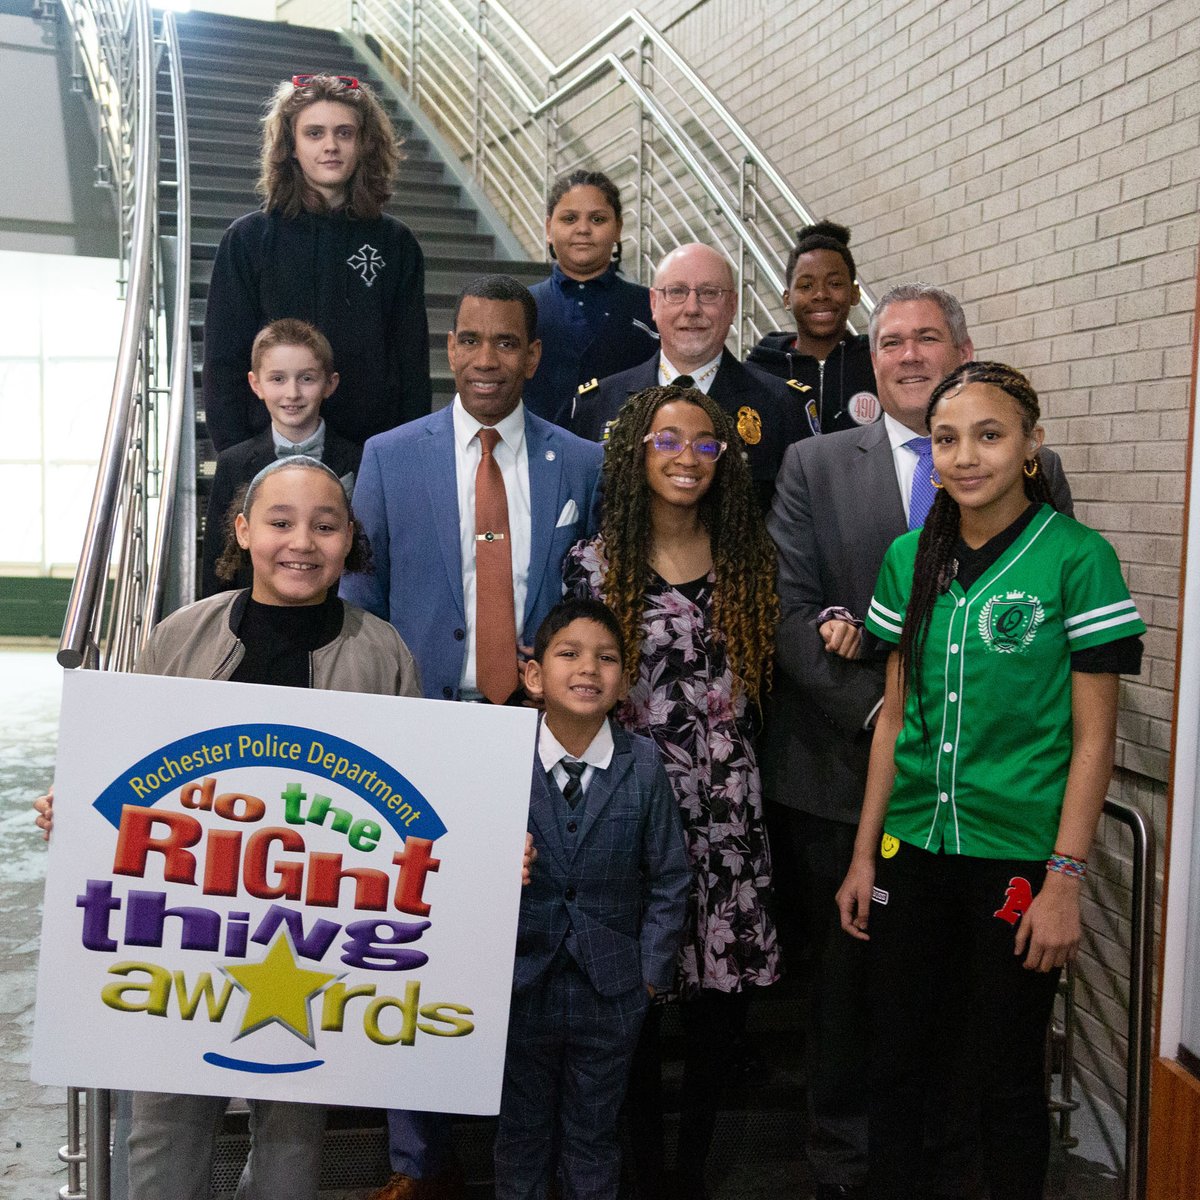 Today, Mayor Evans joined County Executive Bello at a Do the Right Thing Awards (DTRTA) ceremony to recognize students who have gone above and beyond to make a positive difference in our community. To learn more about DTRTA or nominate a child, visit cityofrochester.gov/dotherightthing